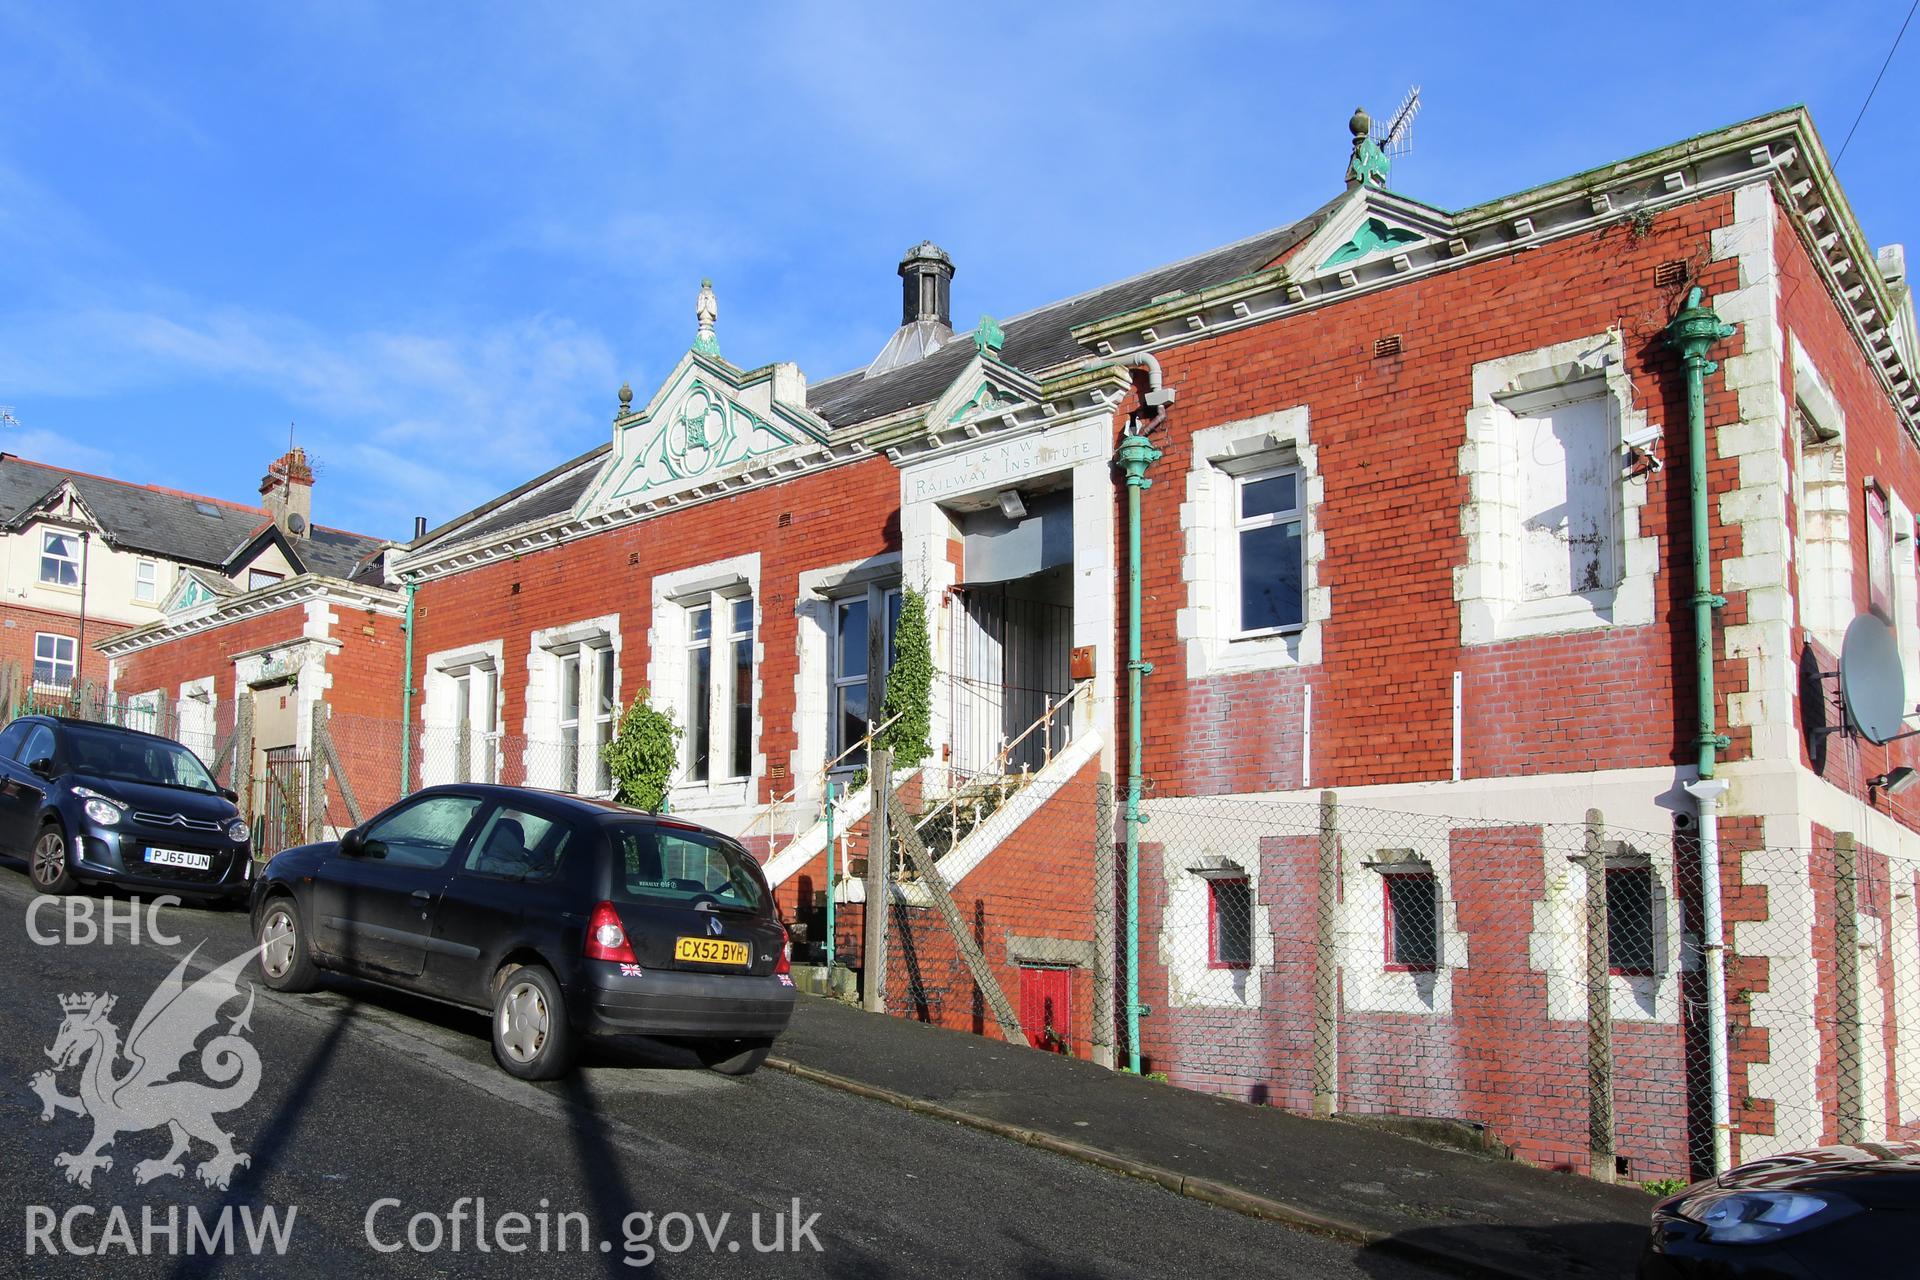 Exterior view showing front elevation of the Railway Institute, Bangor. Photographed during survey conducted by Sue Fielding for the RCAHMW on 4th April 2016.